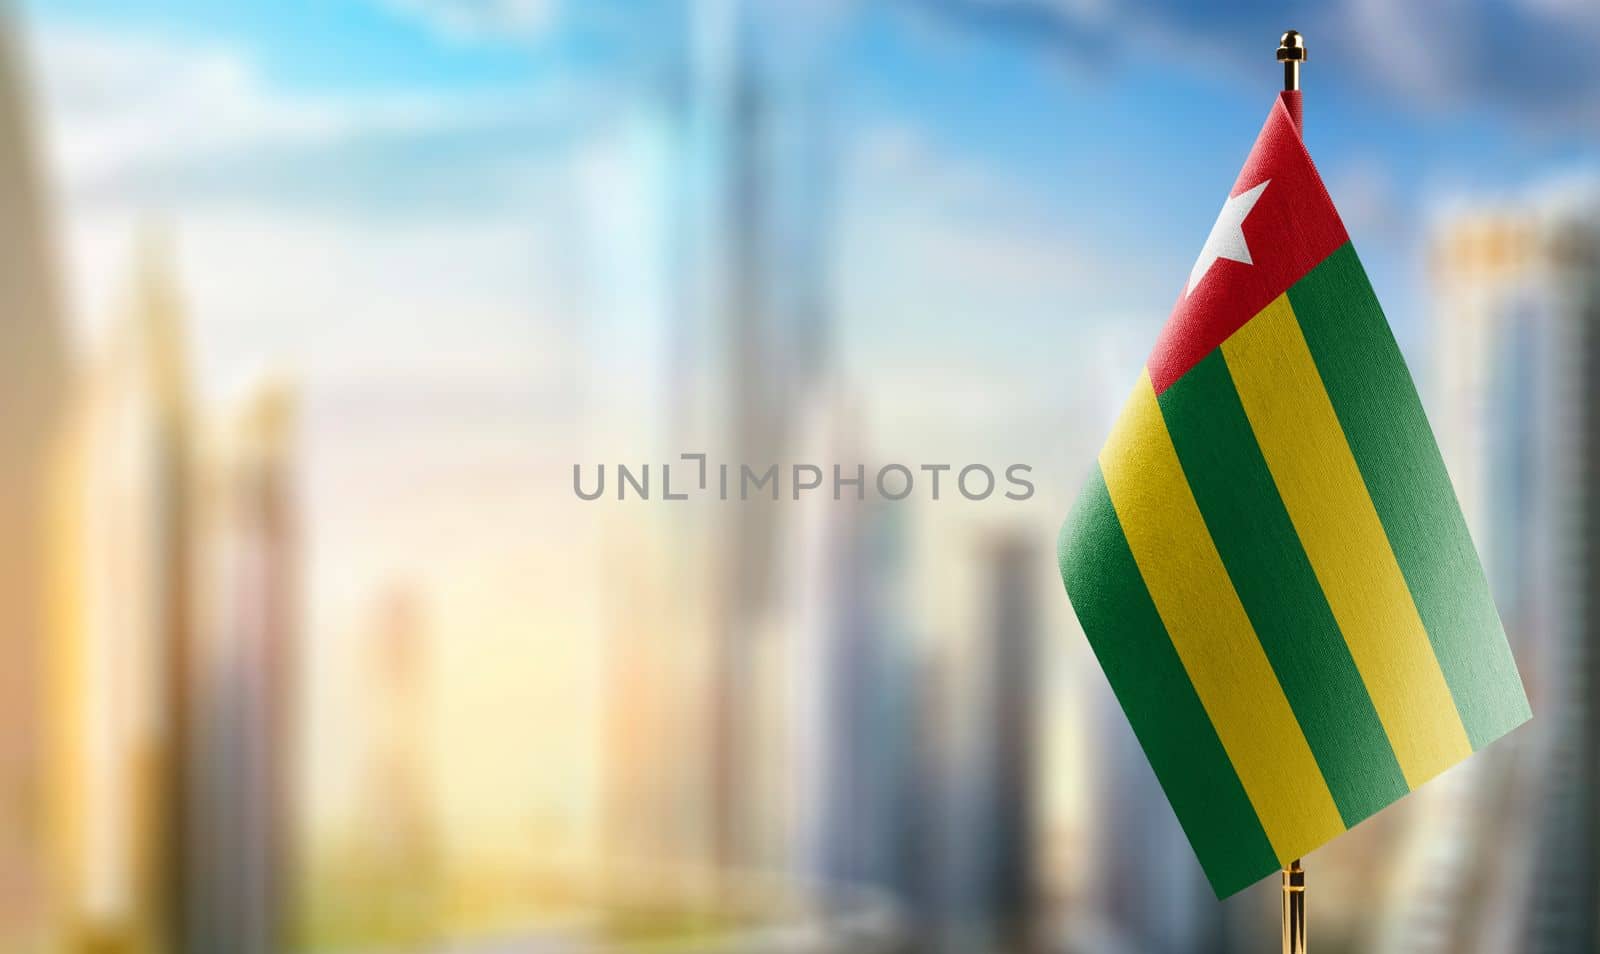 Small flags of the Togo on an abstract blurry background.